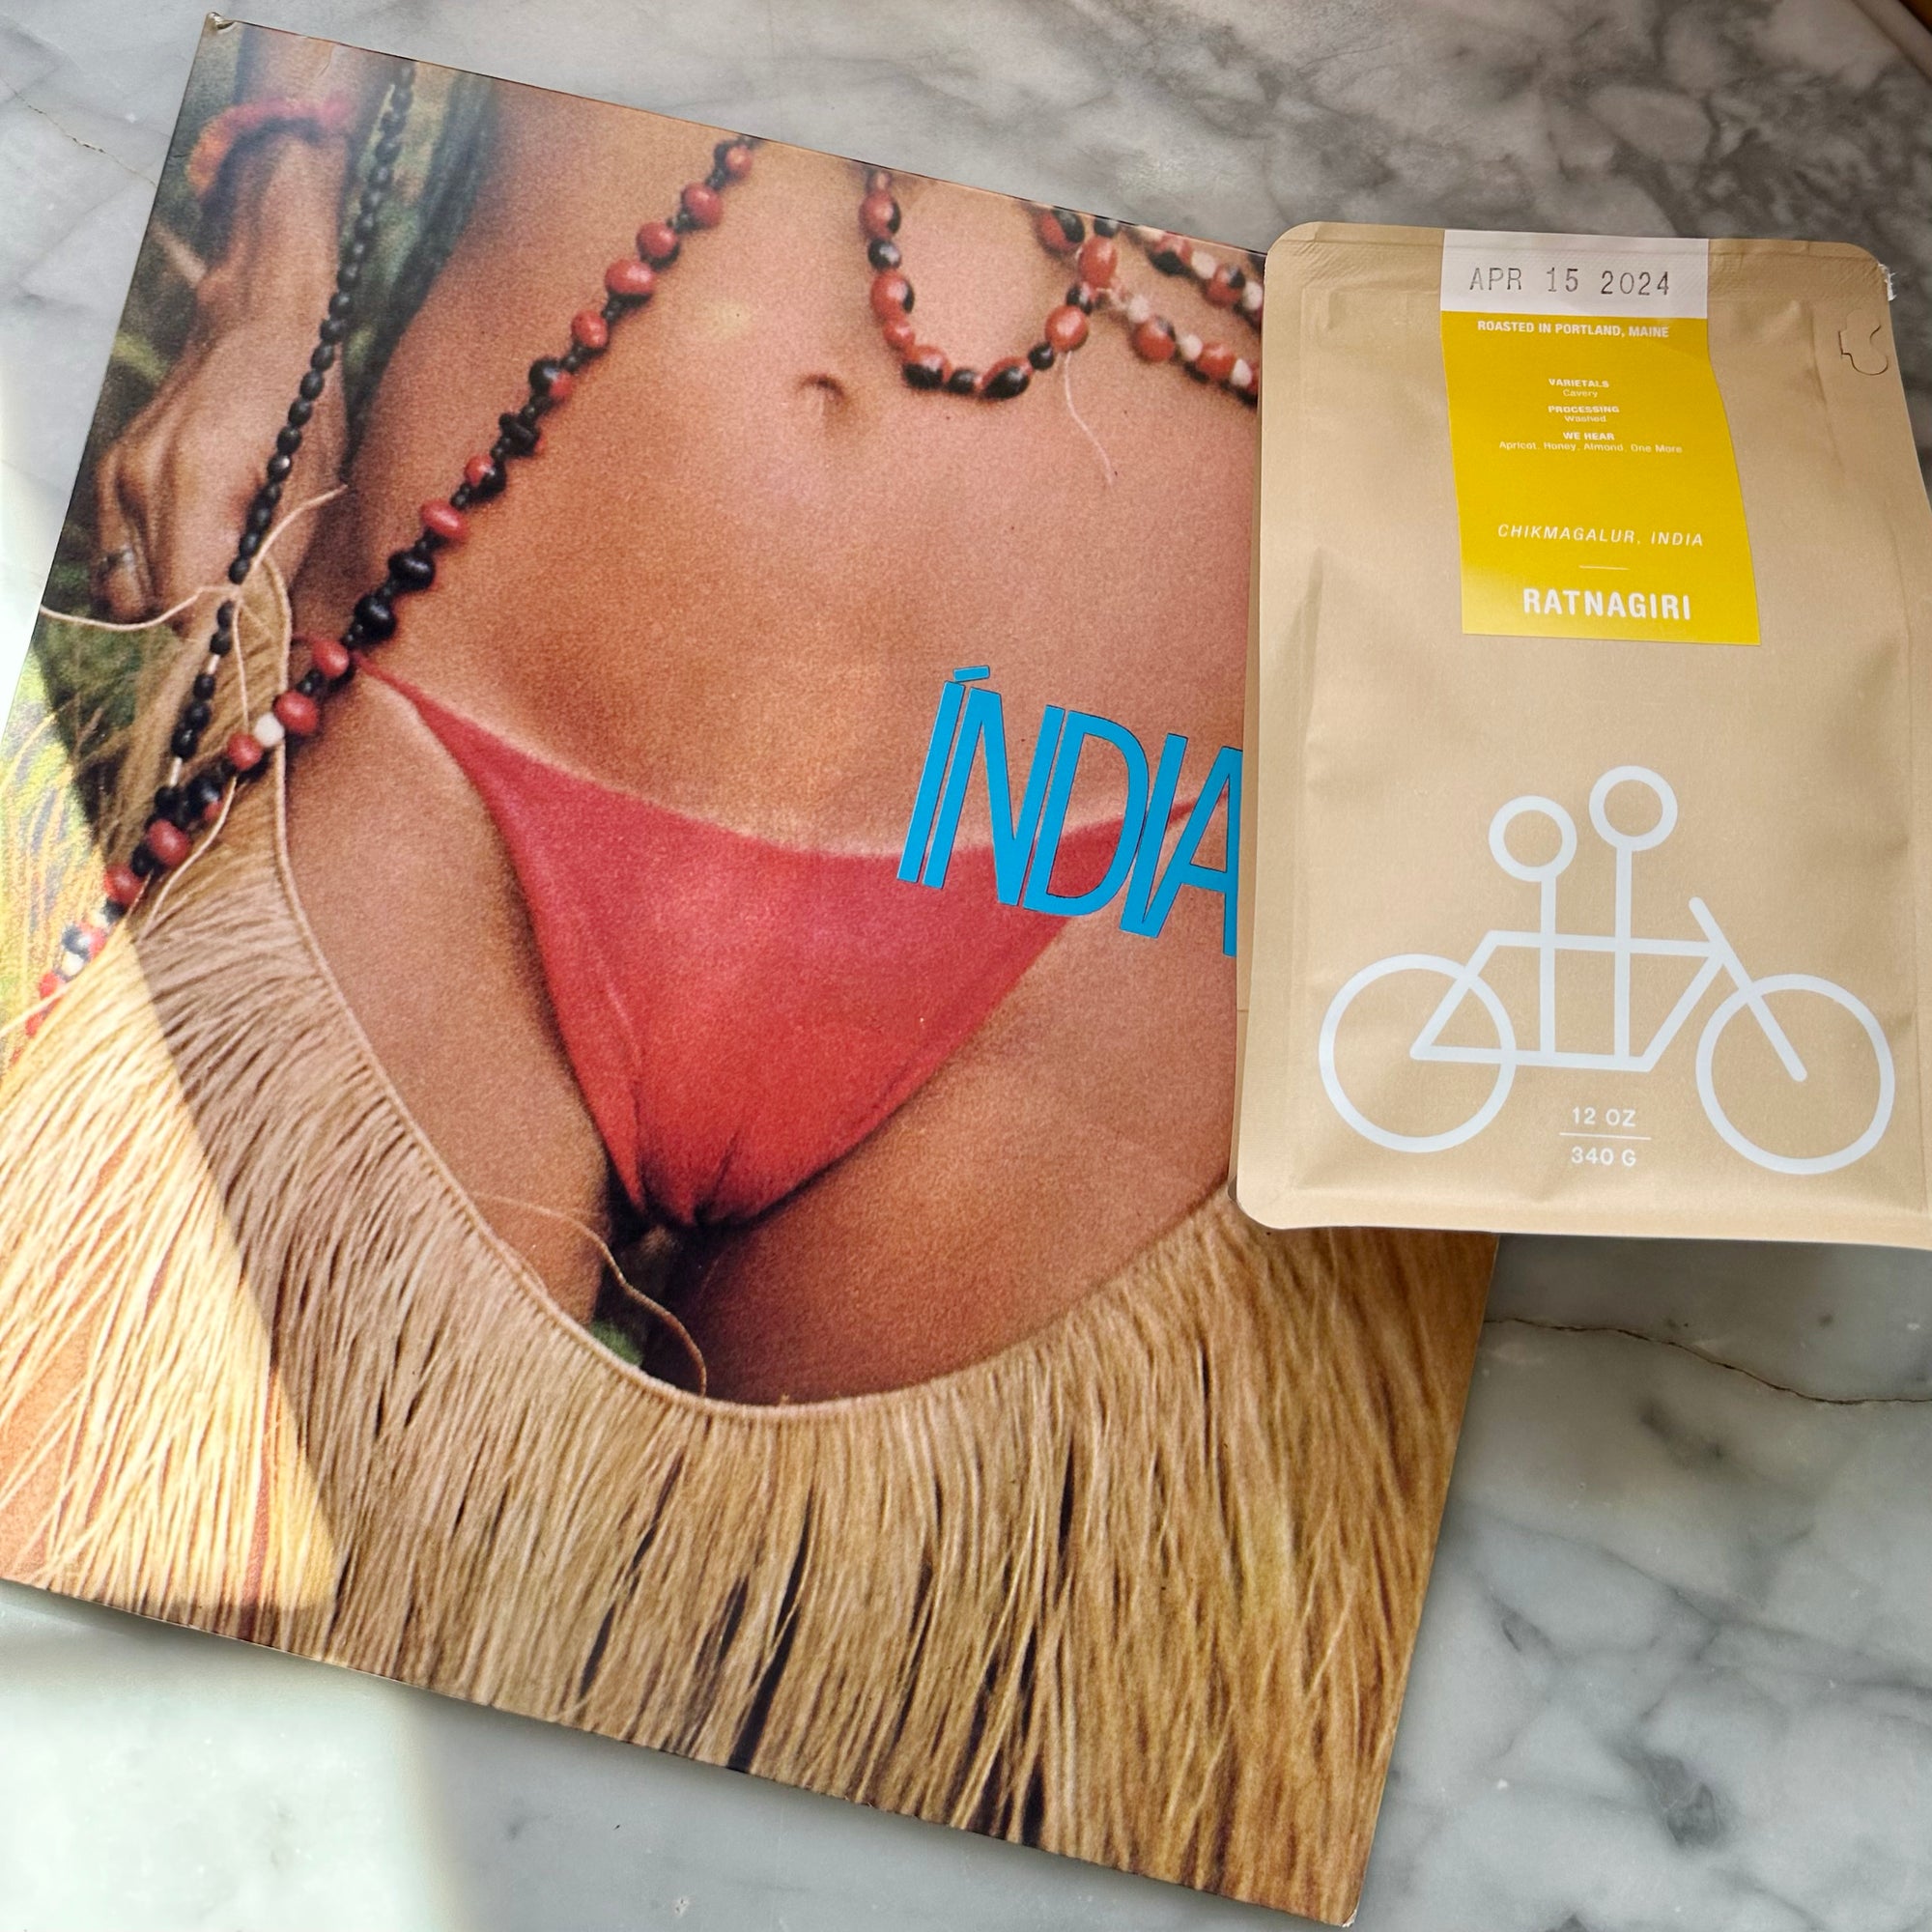 Tandem's The Good Thing - April 2024 Edition featuring a close-up image of a person wearing a red bikini bottom and a grass skirt, with necklaces and the word "India" superimposed, alongside a bag of limited edition coffee